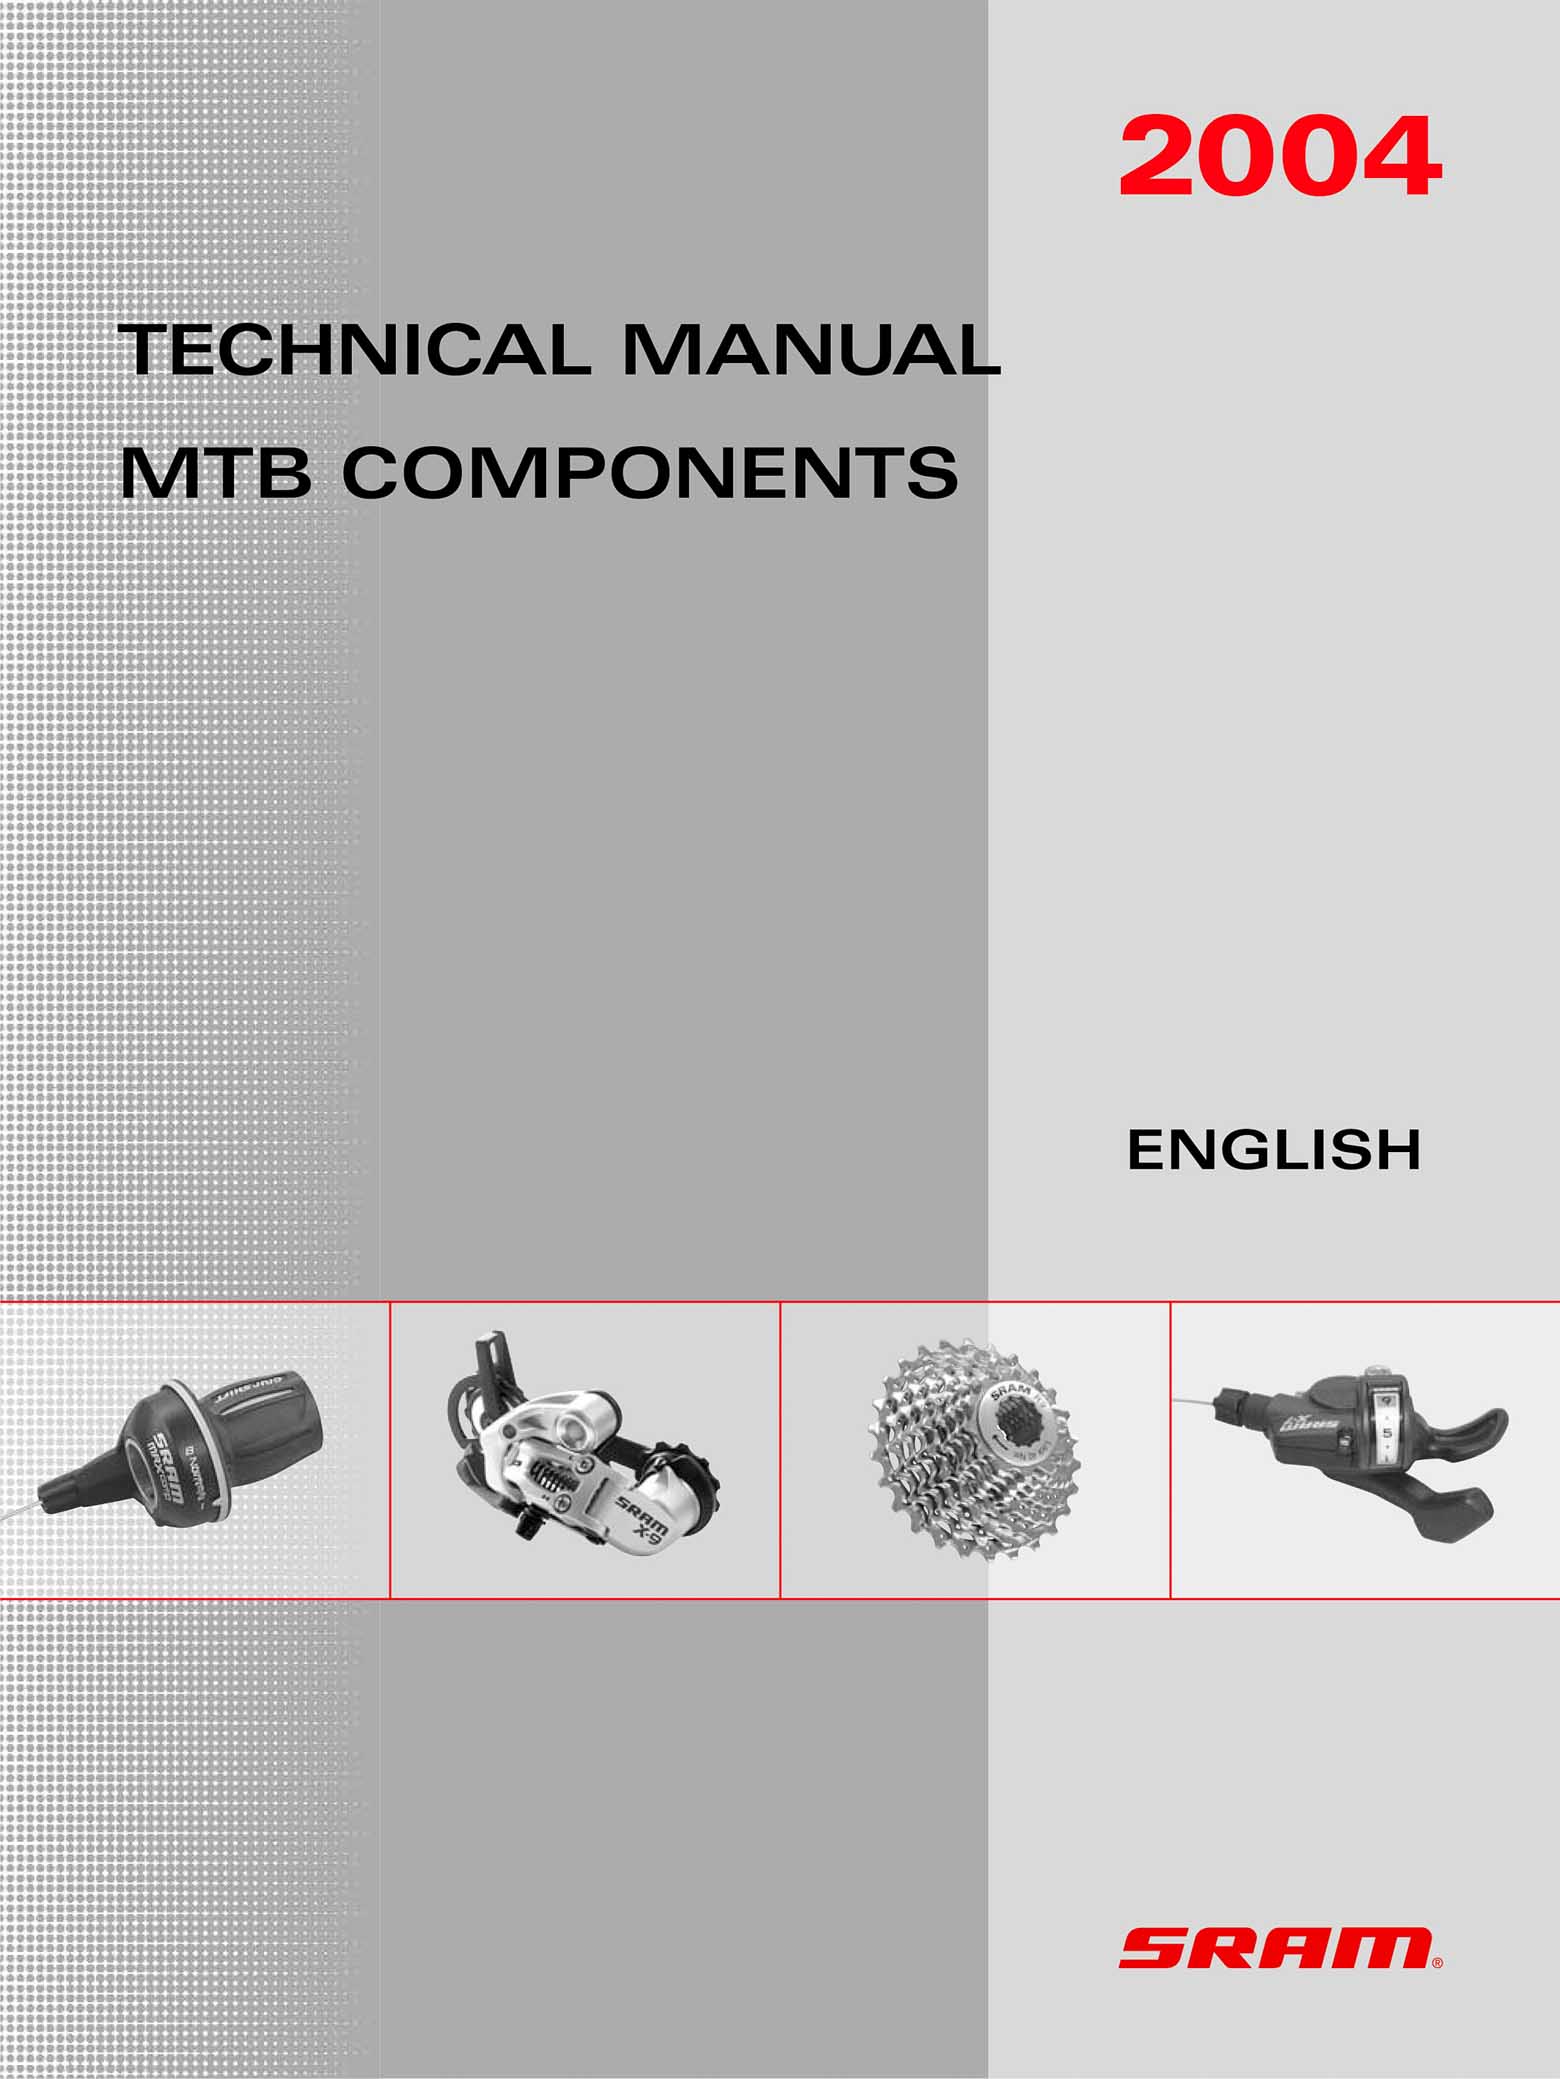 SRAM Technical Manual 2004 front cover main image